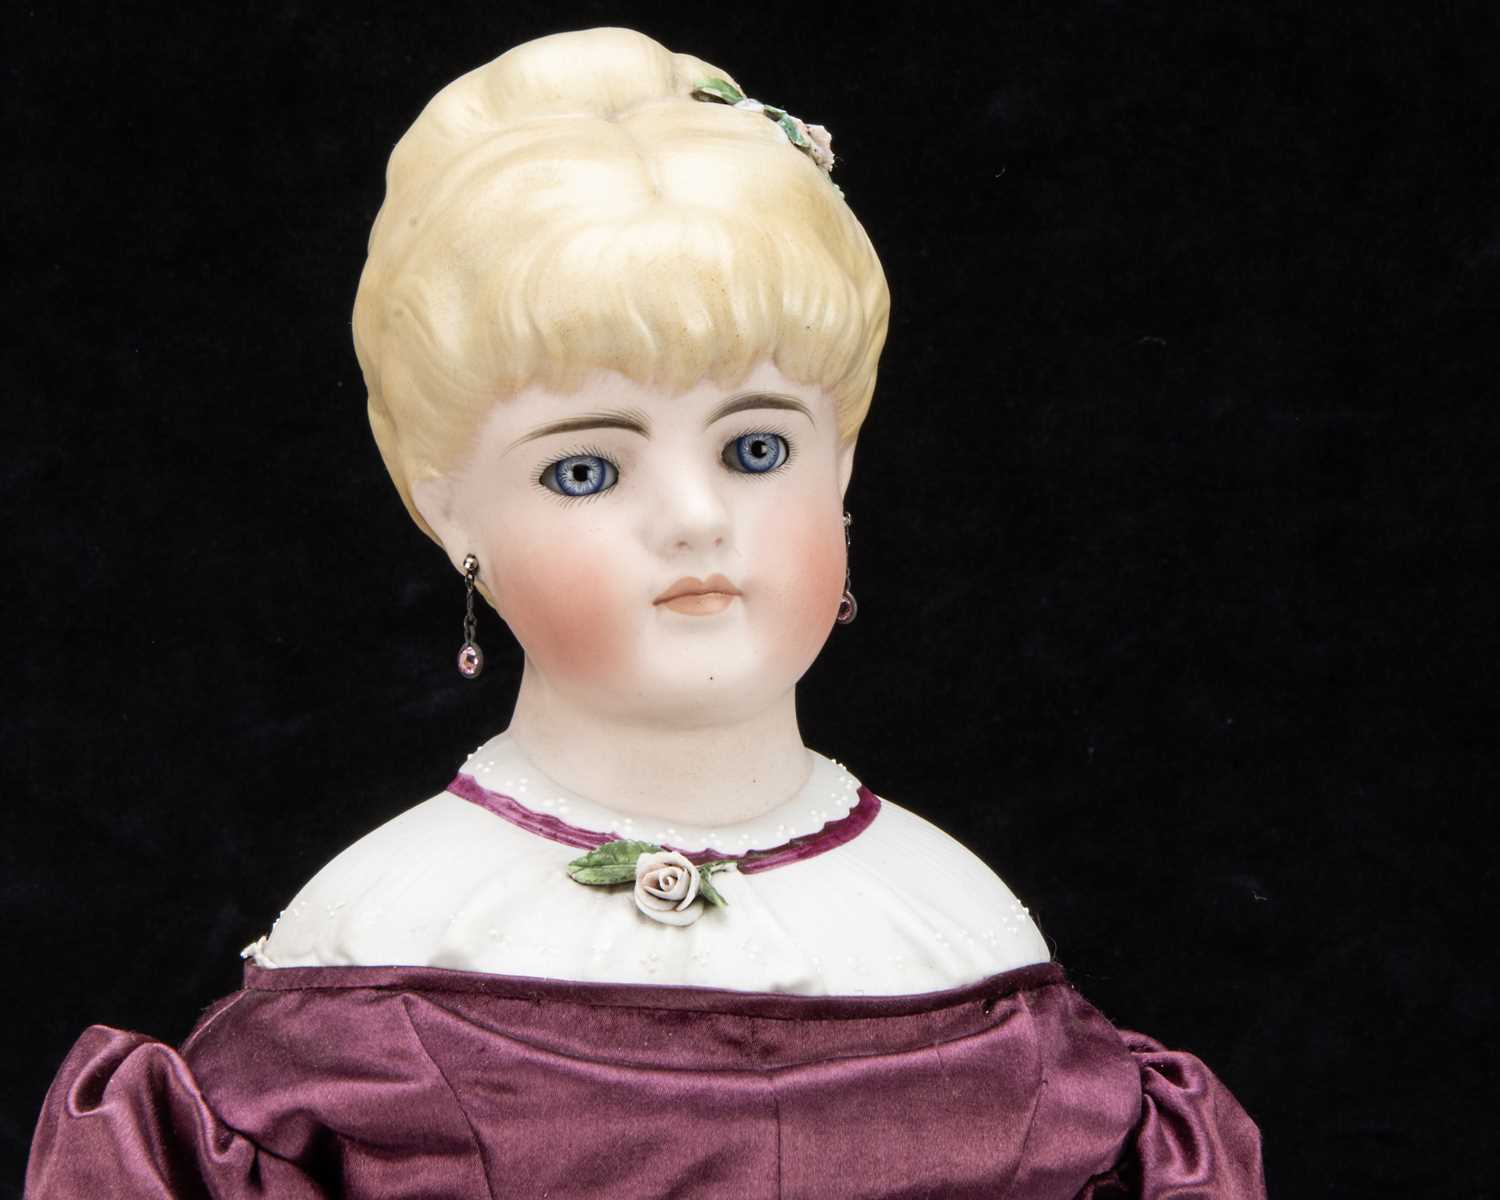 A rare Kling 150 bisque shoulder-head lady doll 1870s, - Image 2 of 3